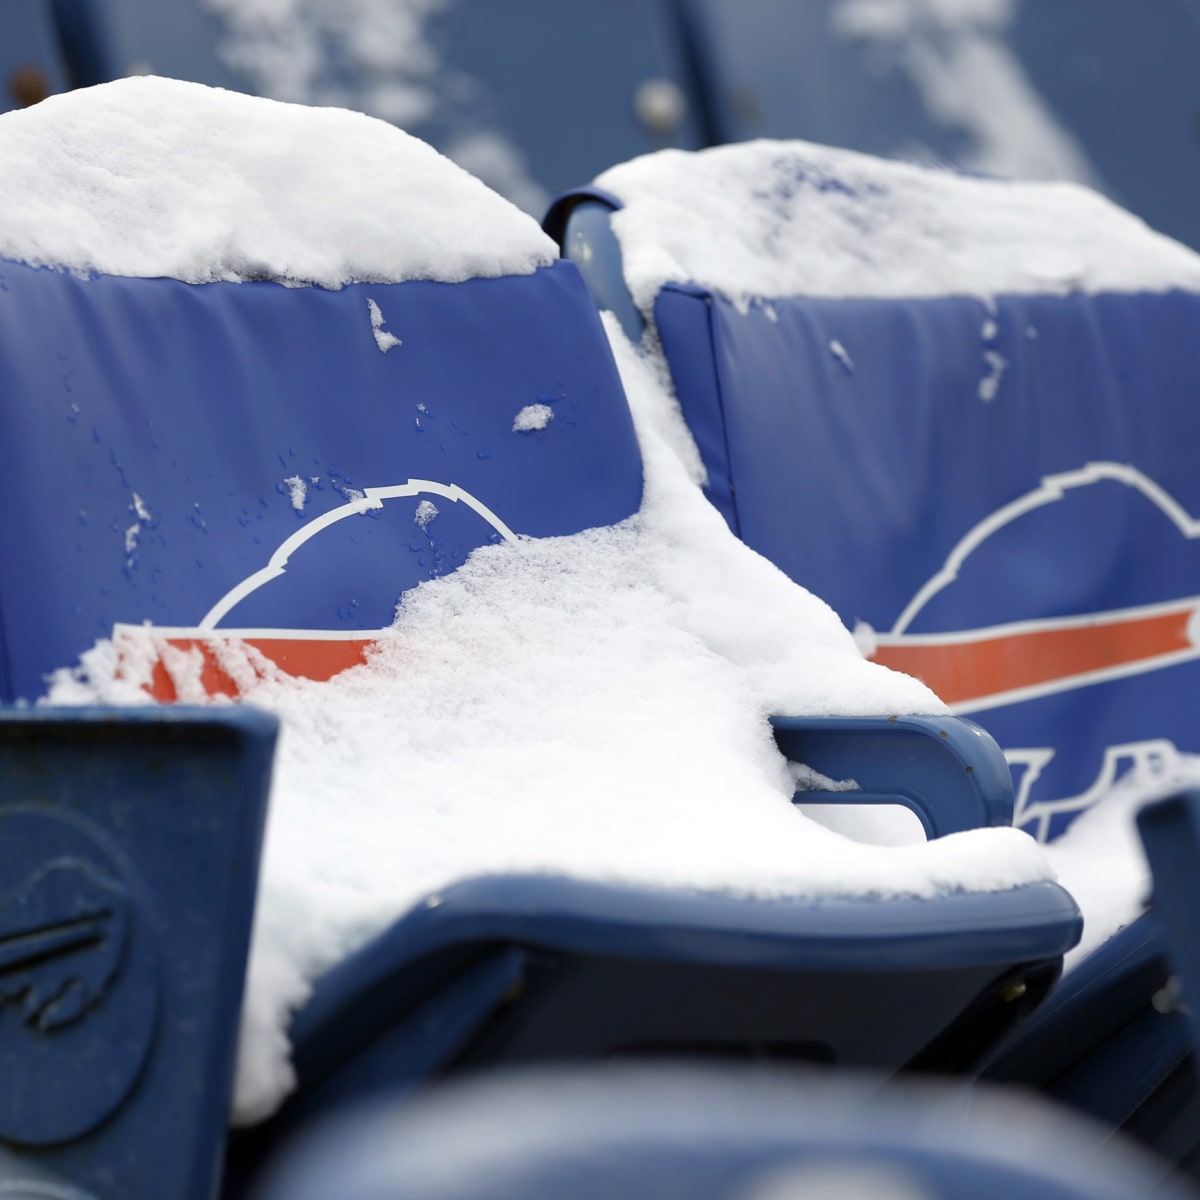 Browns-Bills game moved to Detroit